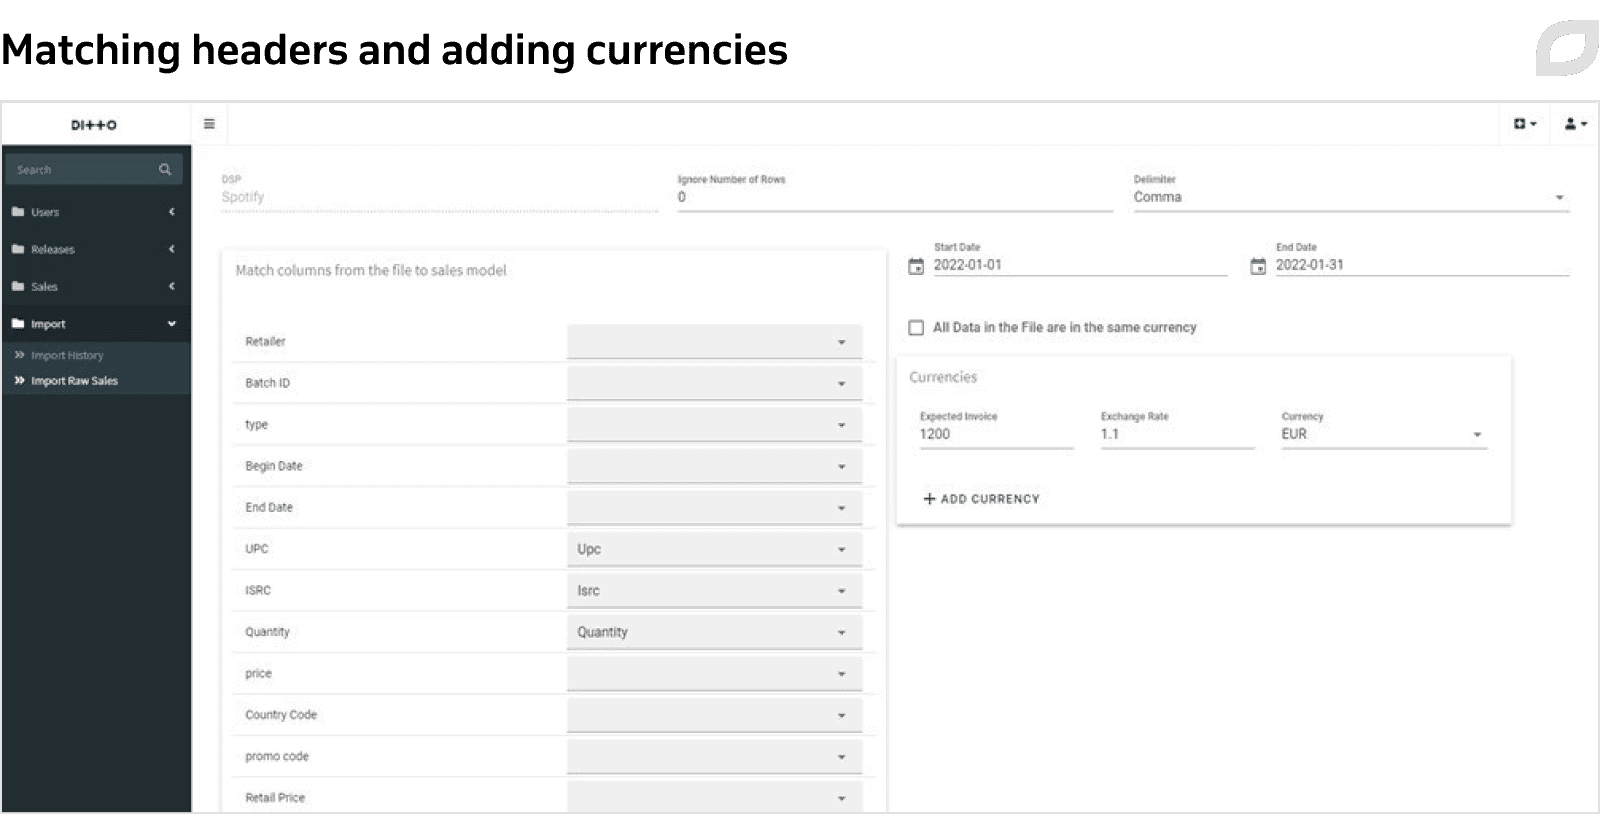 Matching headers and adding currencies